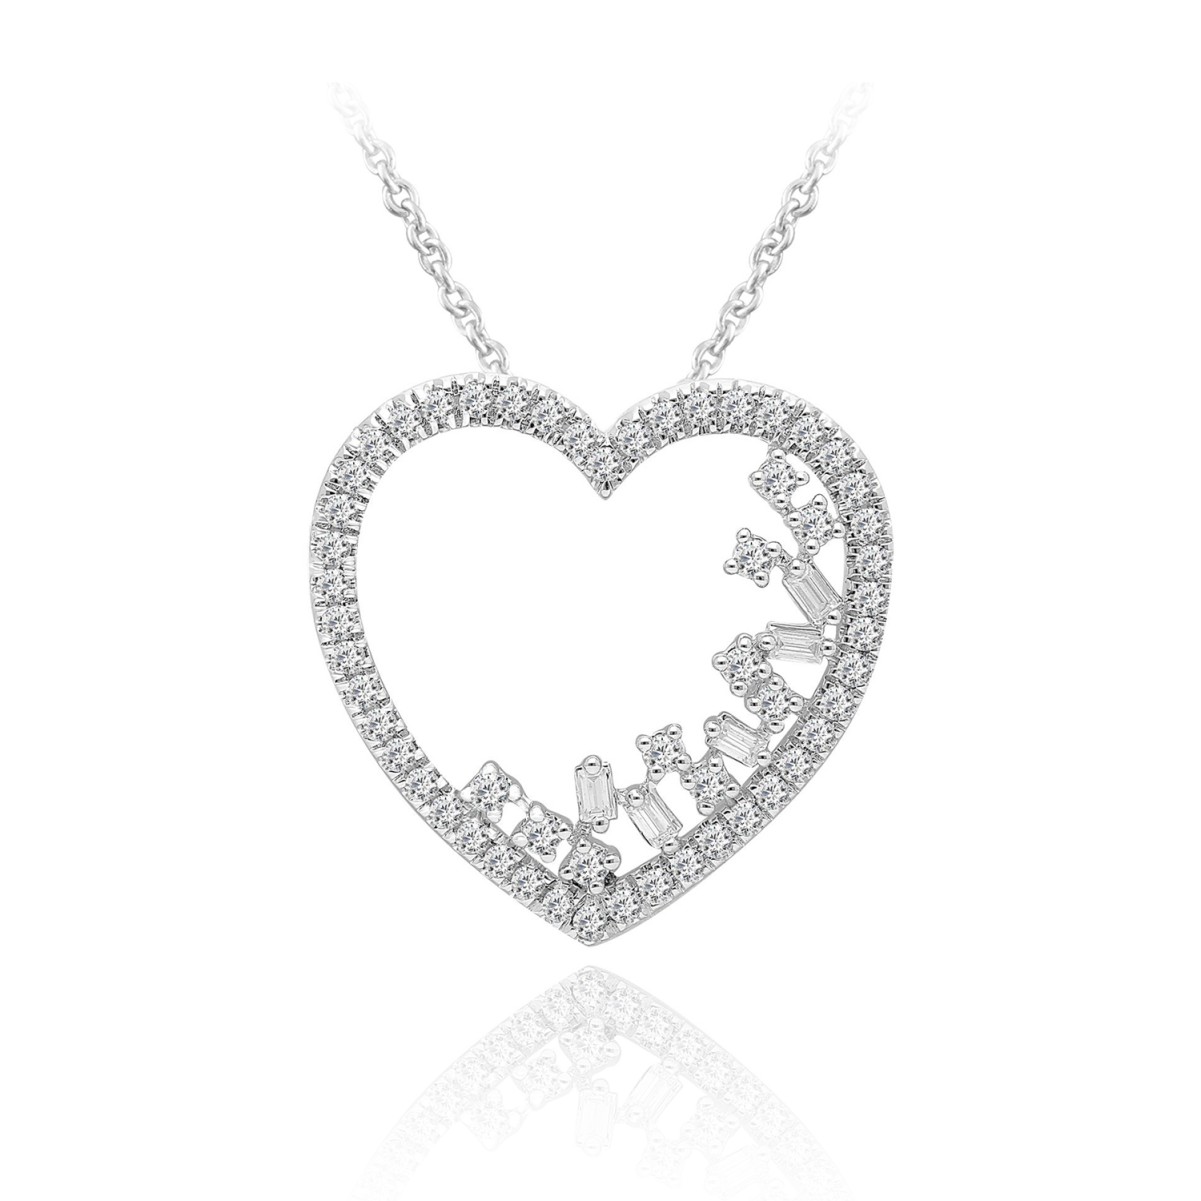 18K WHITE GOLD 1/2CT ROUND/BAGUETTE DIAMOND LADIES PENDANT WITH CHAIN  